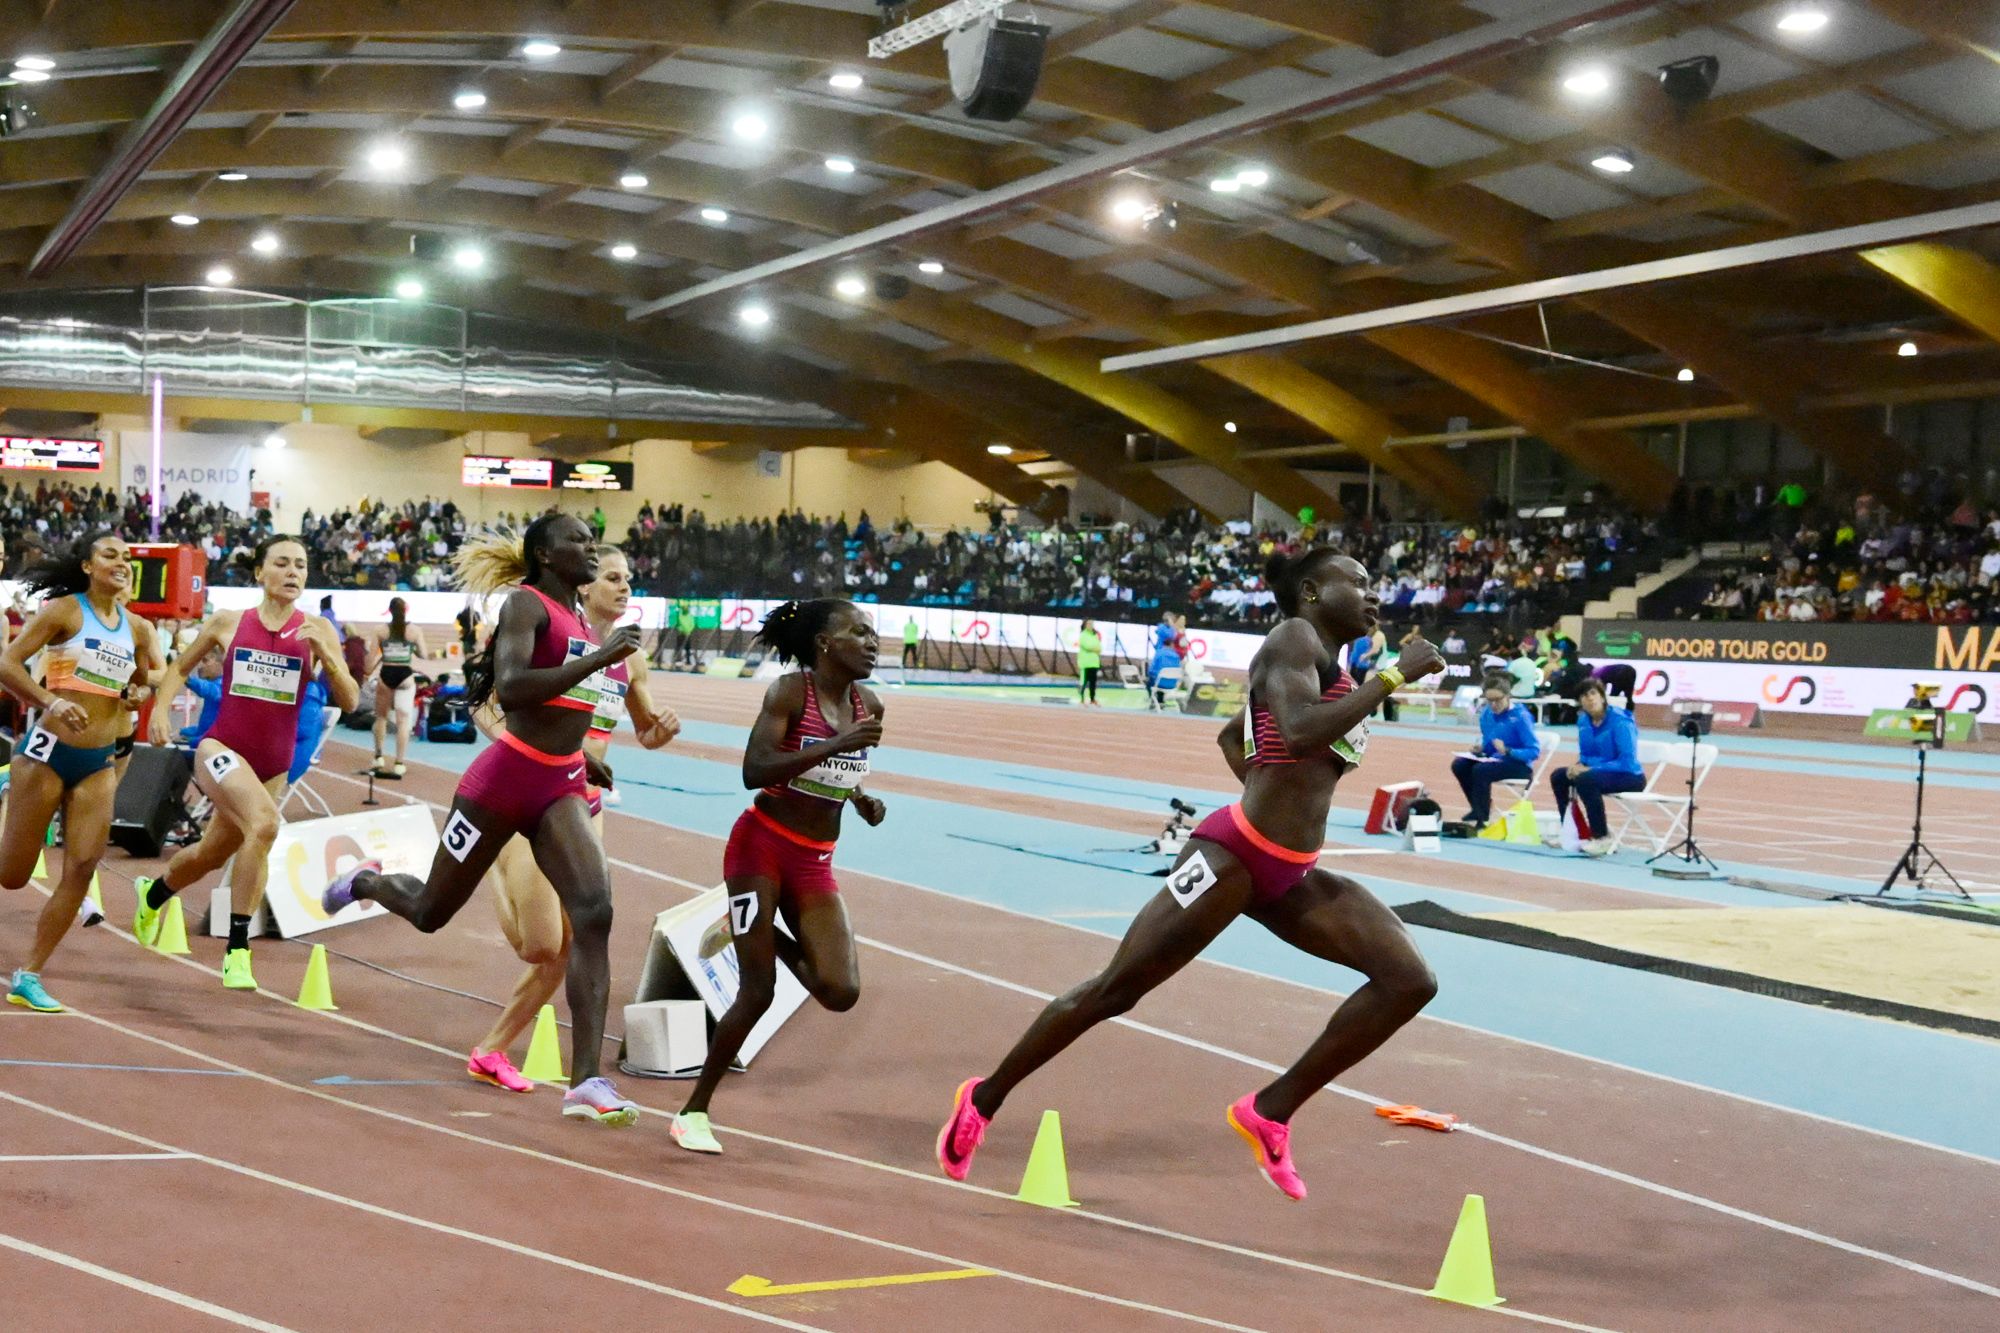 Noelie Yarigo in the 800m at the World Indoor Tour meeting in Madrid